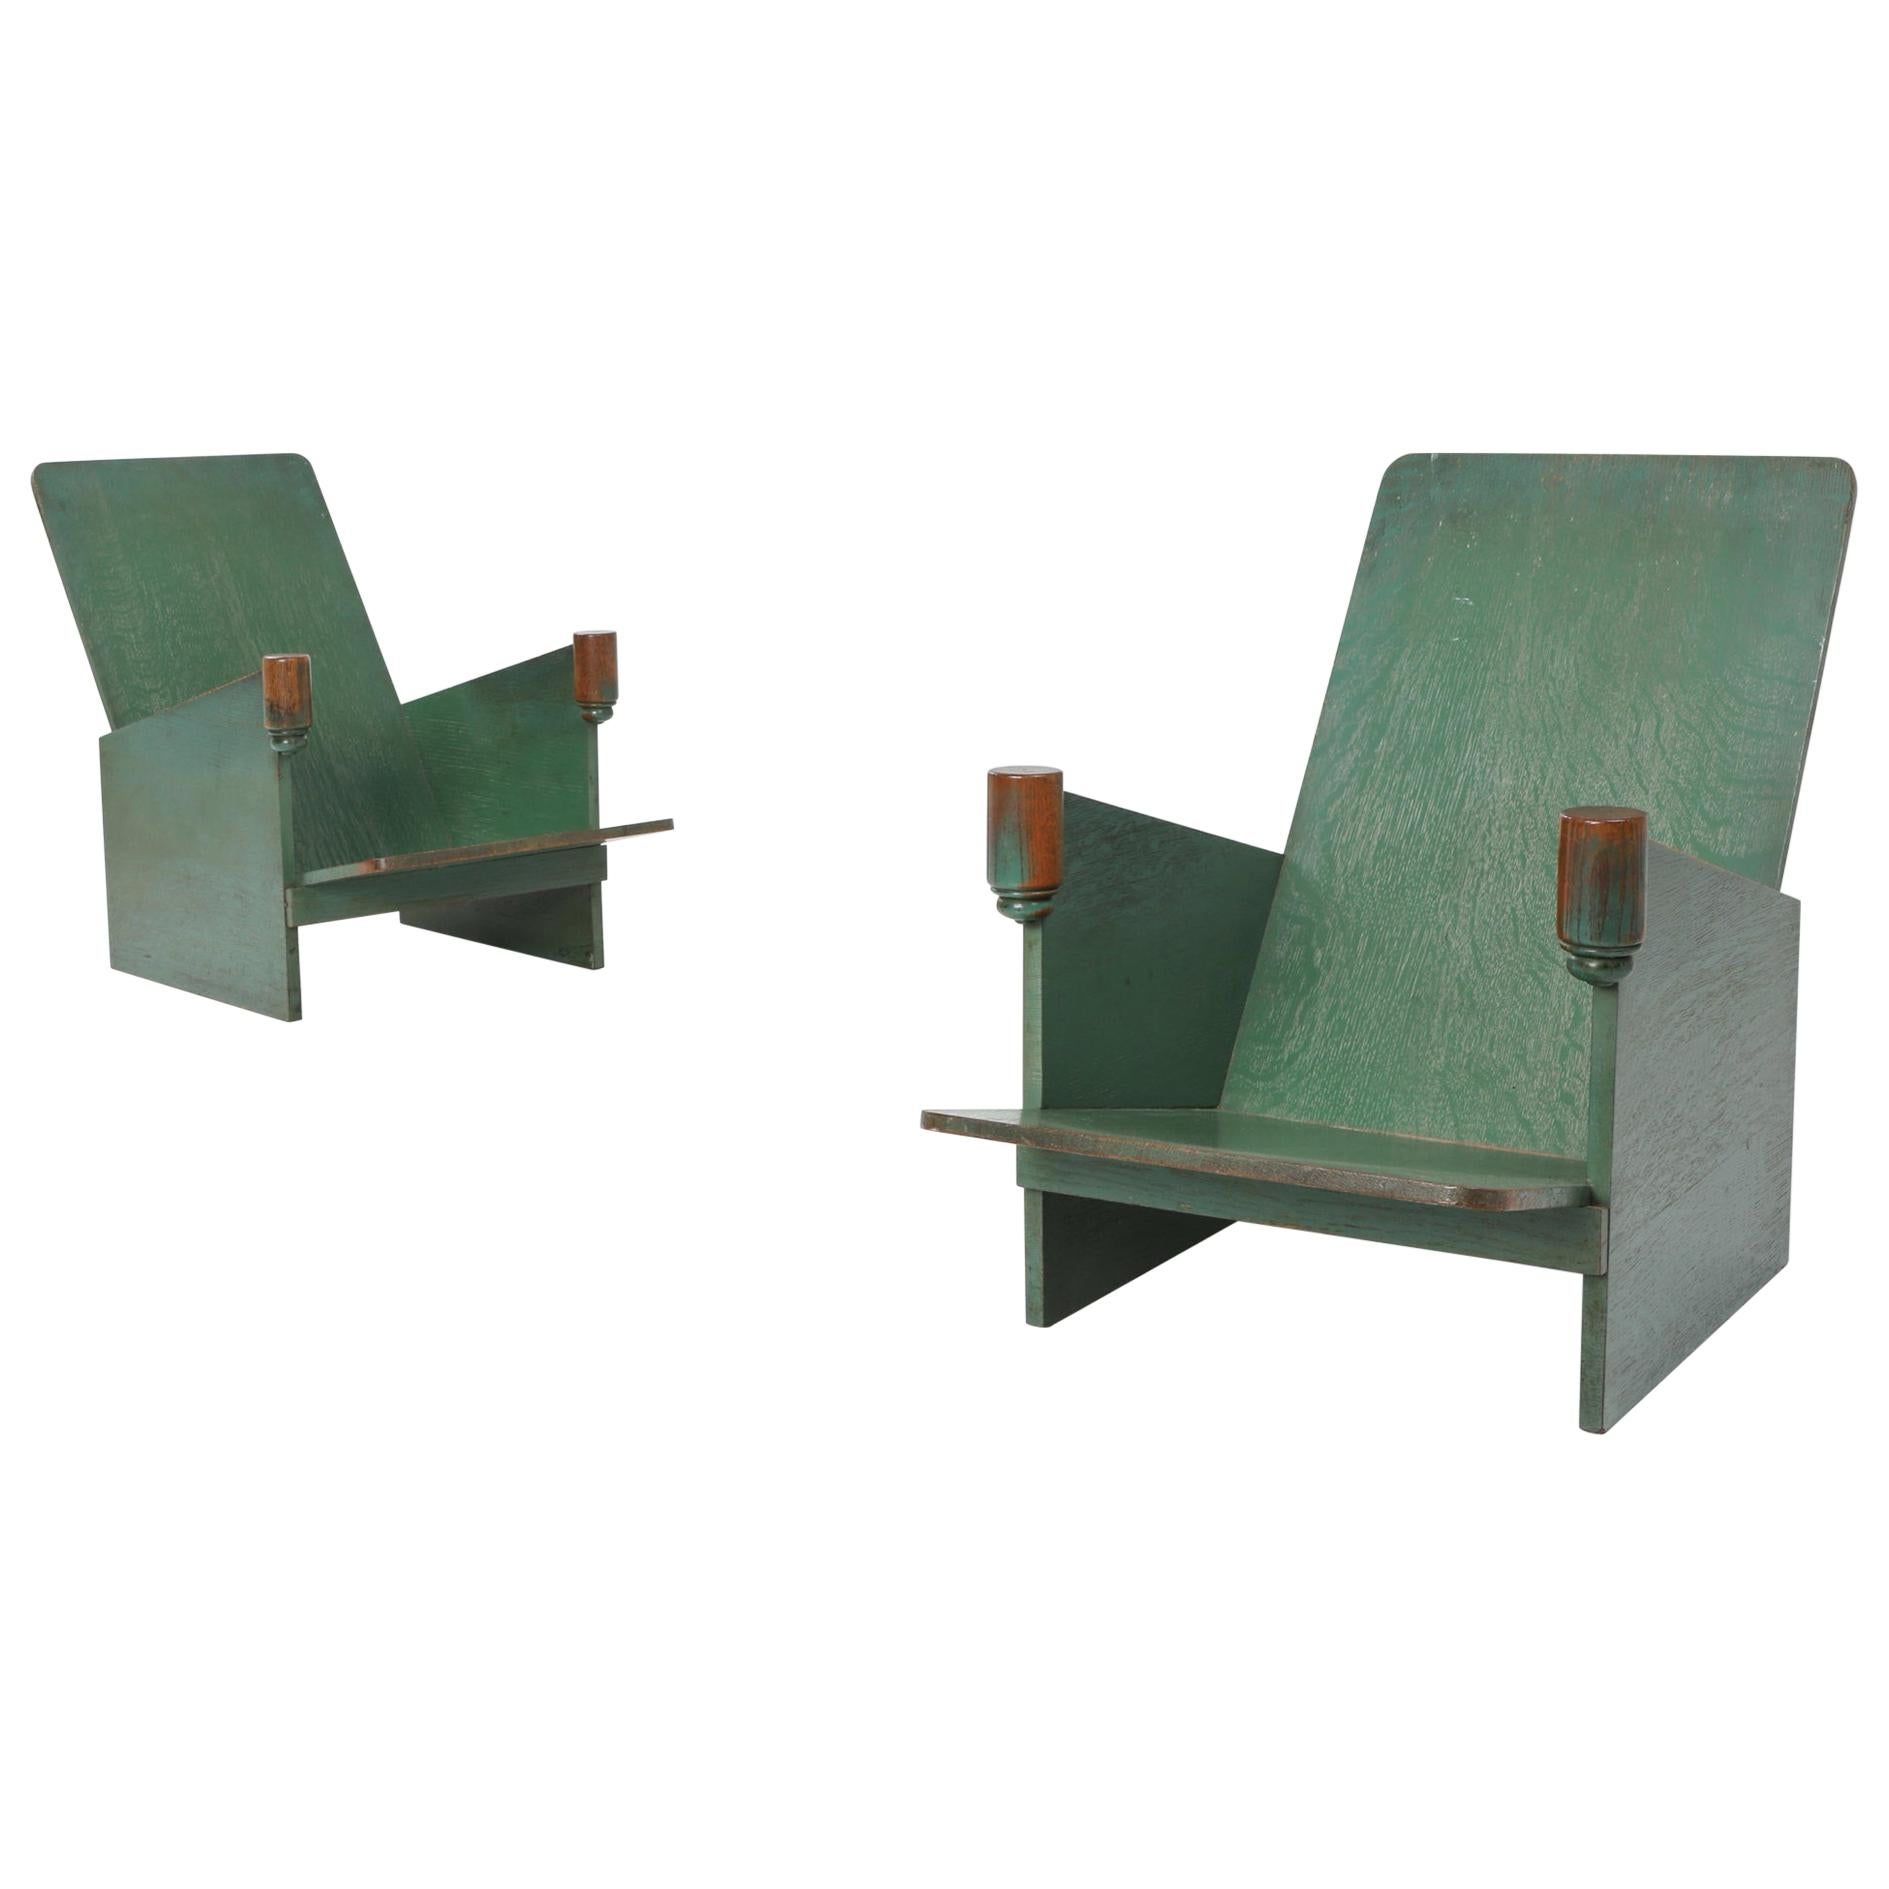 Constructivist Green Lounge Chairs by Hosts & Maes